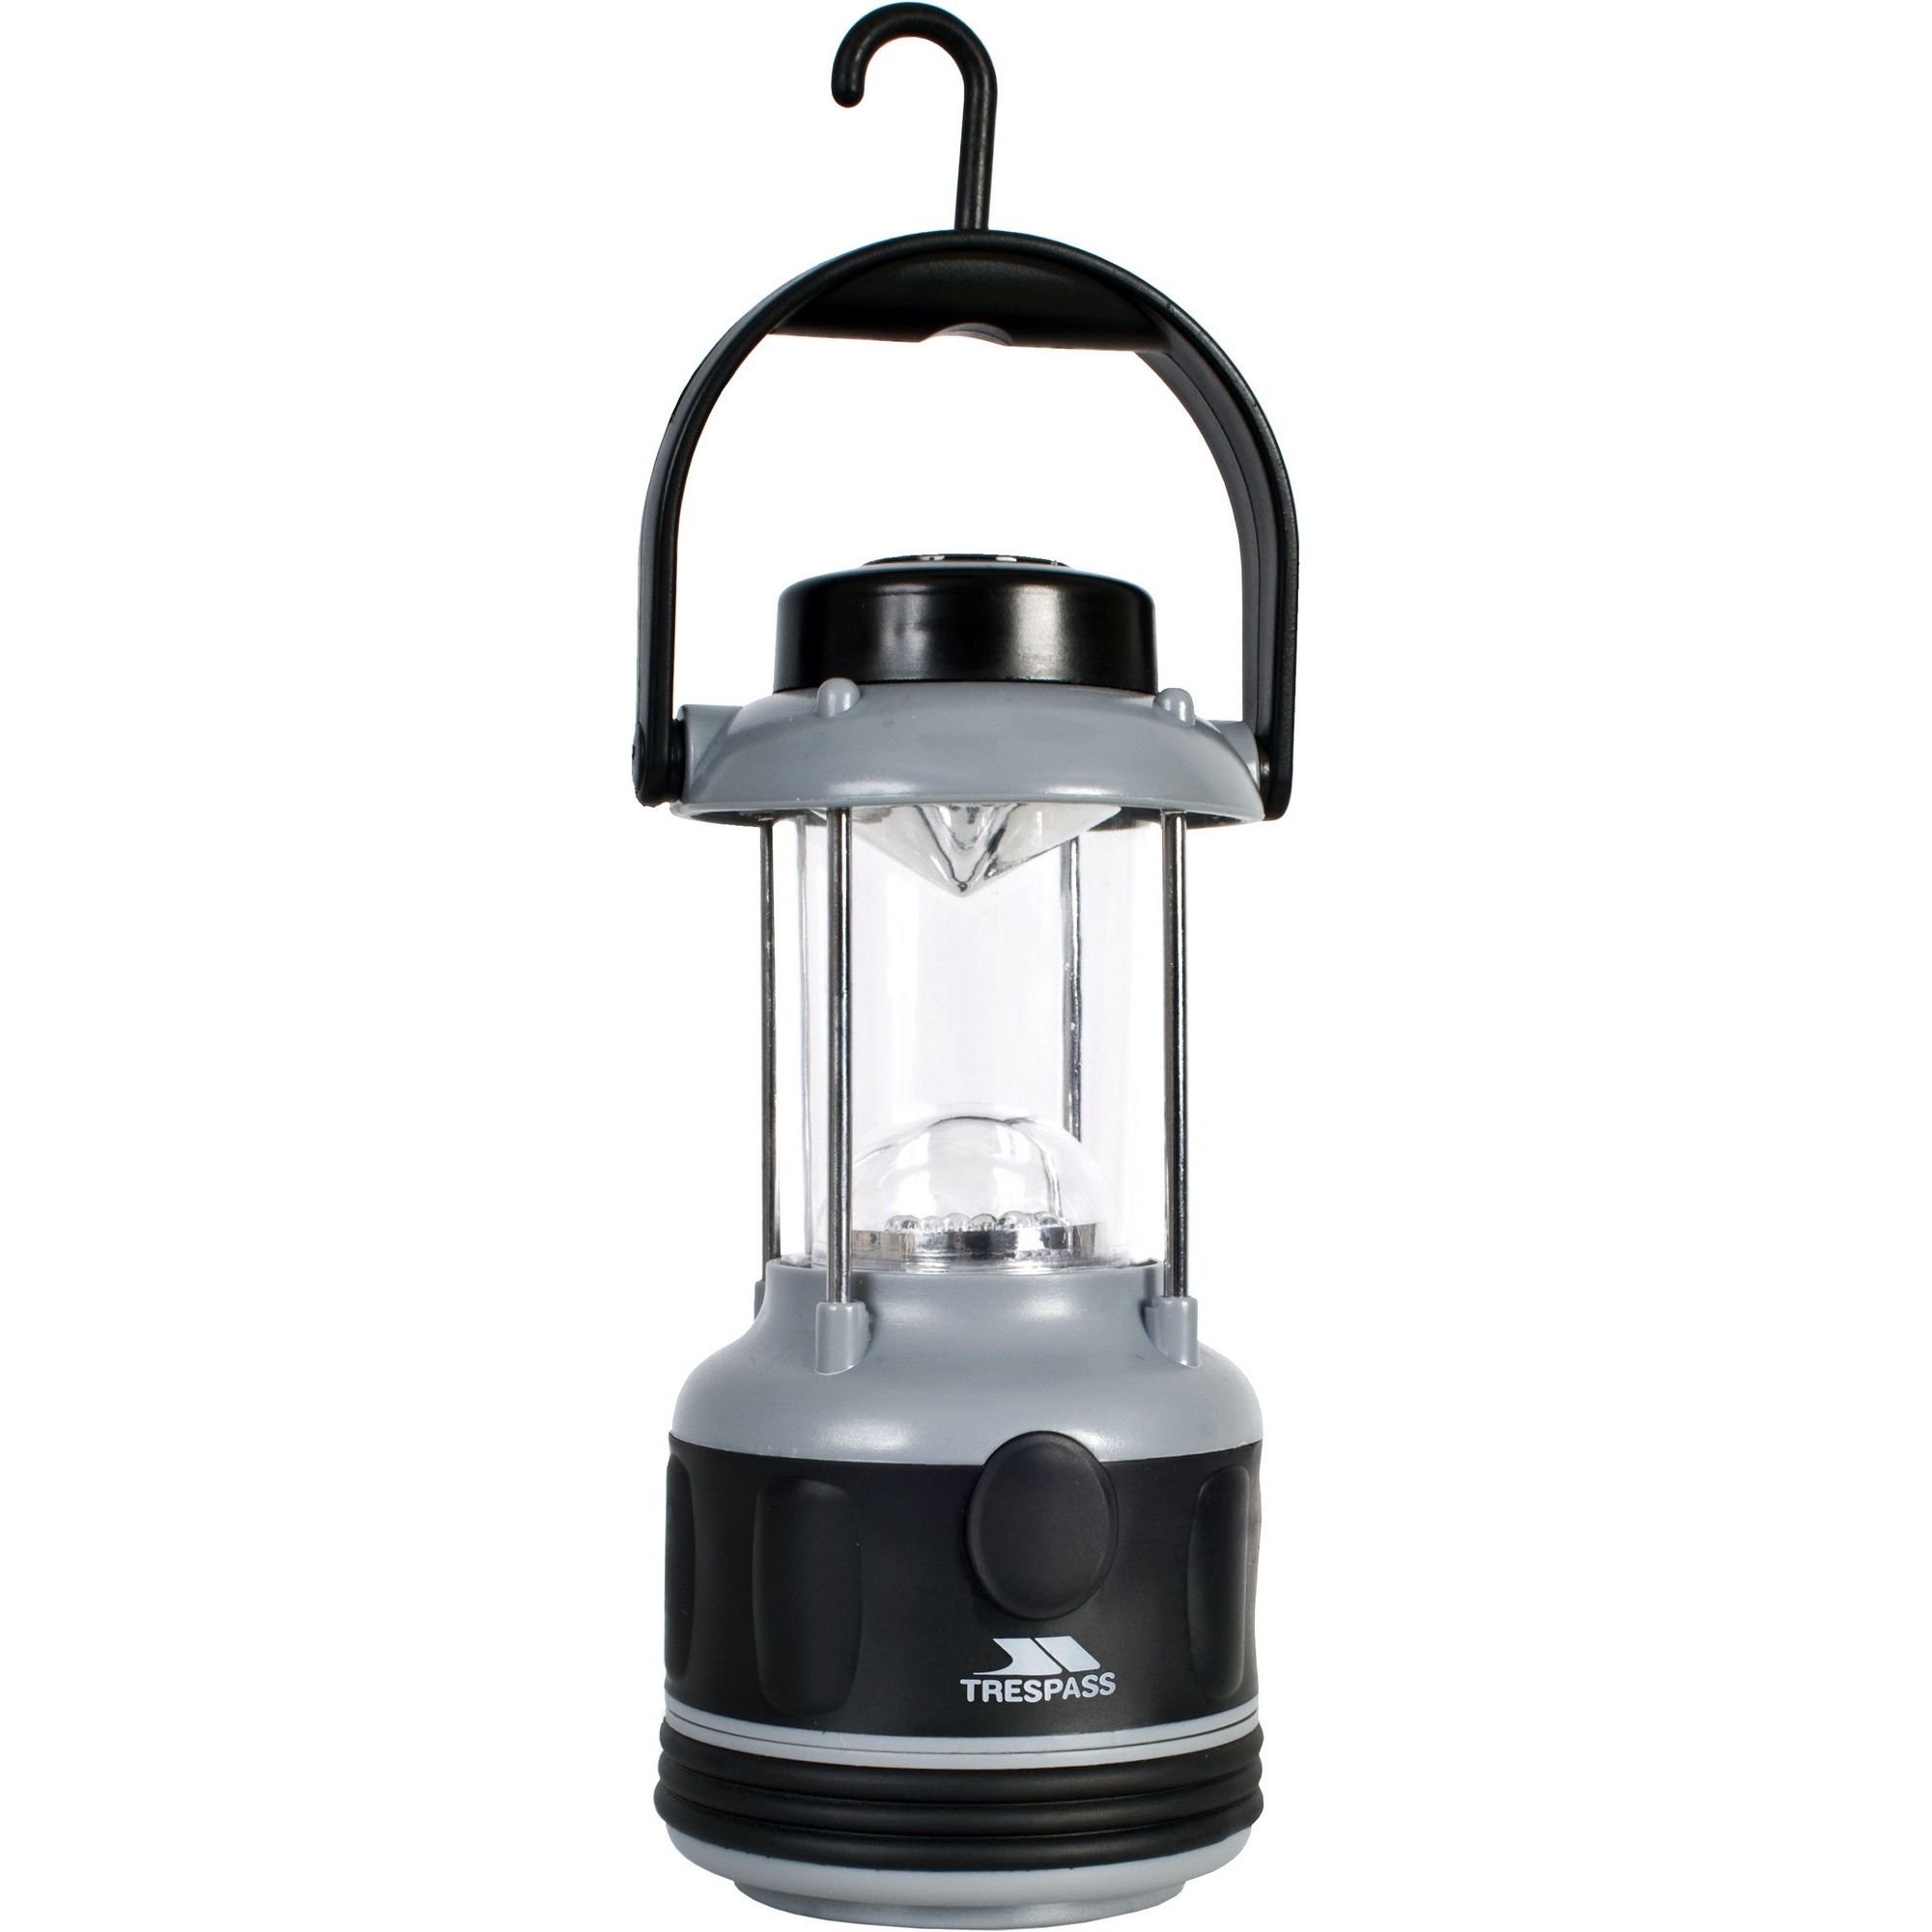 Travel lantern with 8 LEDs. Fold-away hang hook. Compass. Durable construction. Requires 4 x C Batteries.